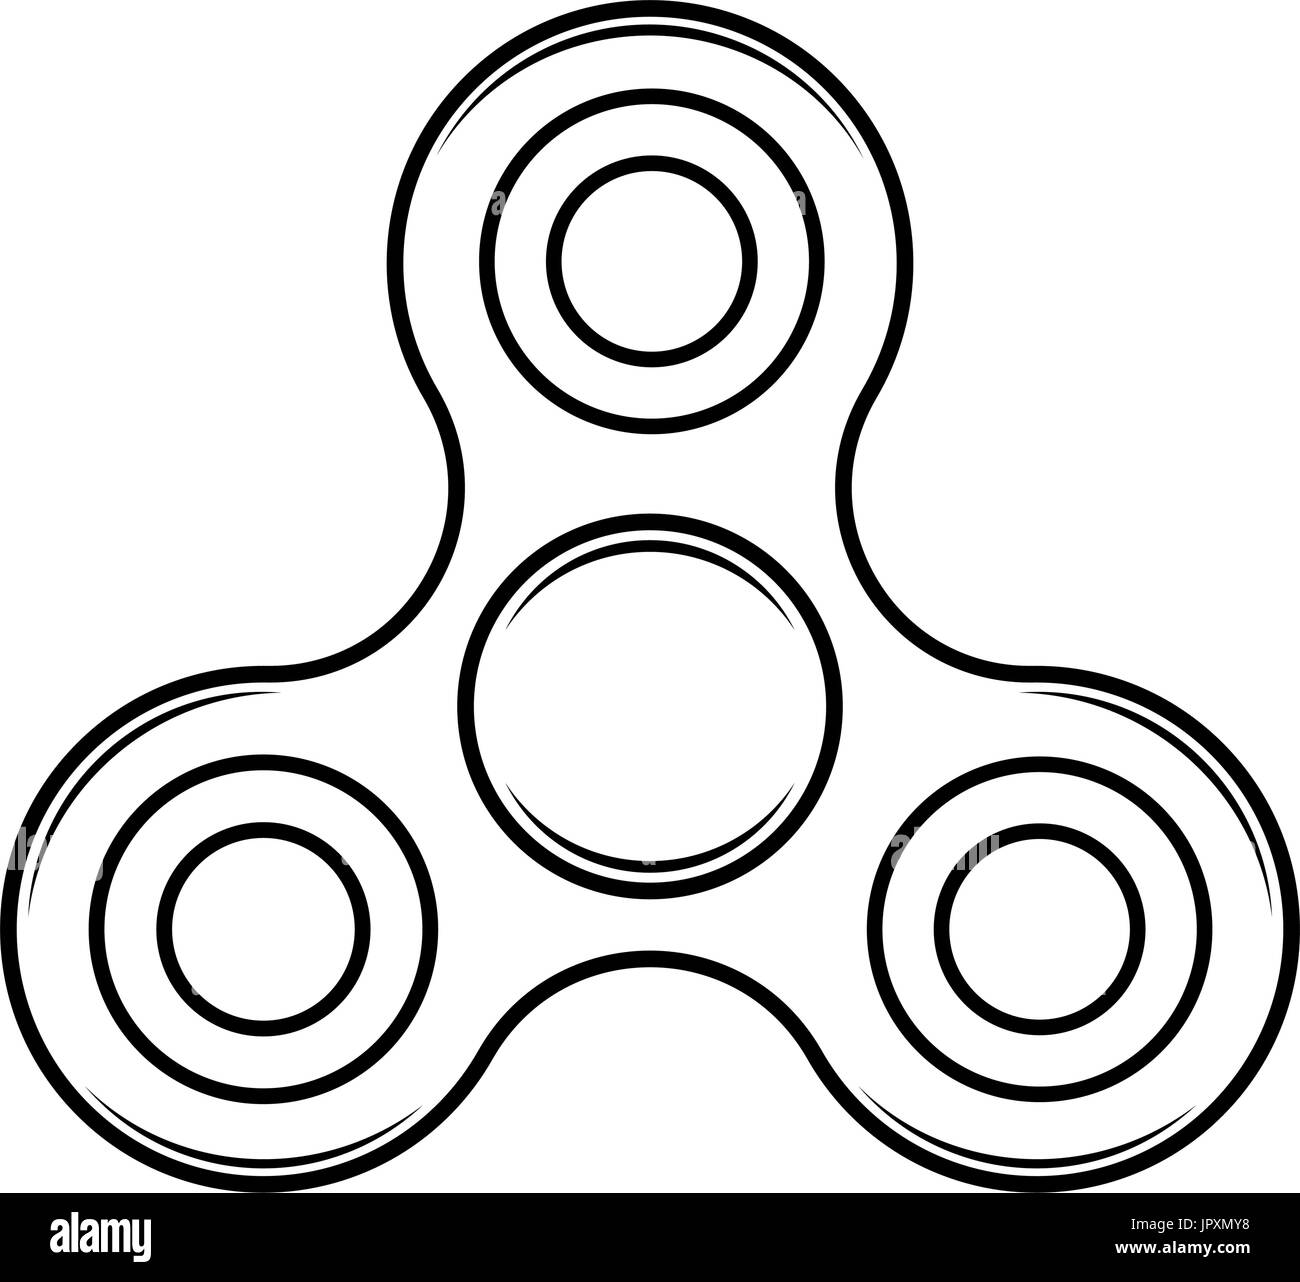 Download Fidget spinner toy. Isolated vector icon Stock Vector Art & Illustration, Vector Image ...